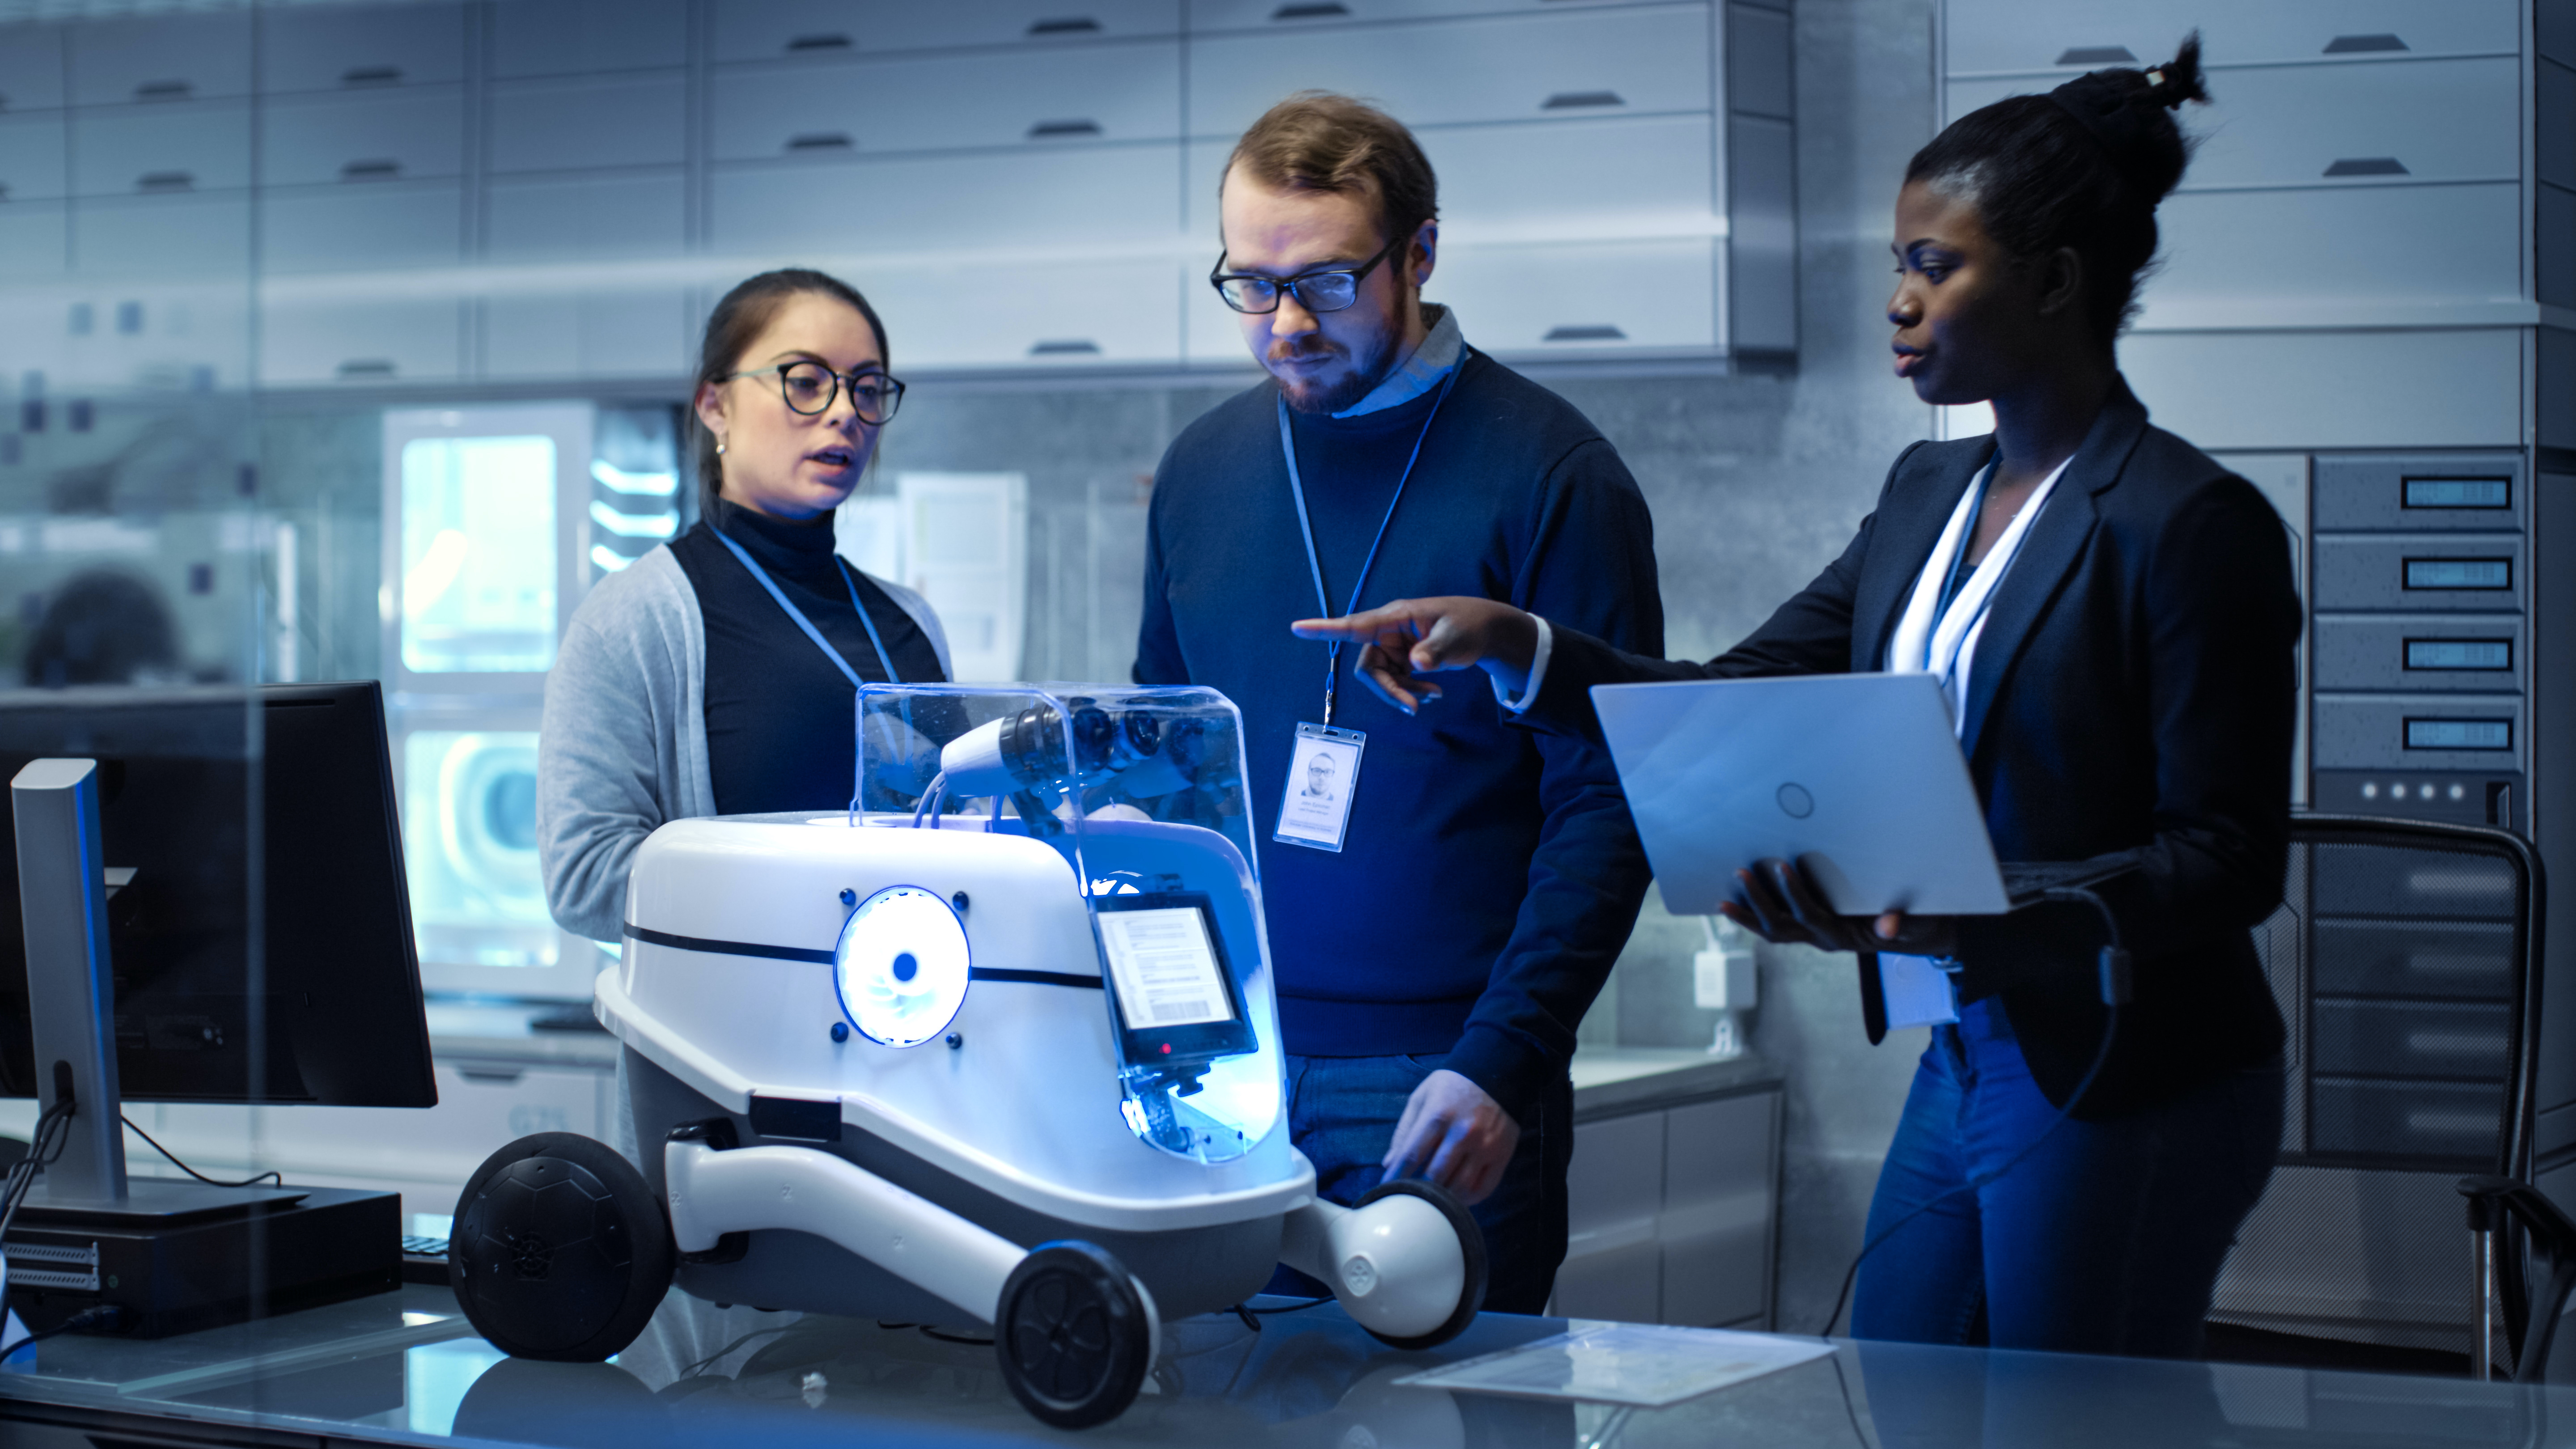 6 Things to Get Right with Workplace Robotic Programs